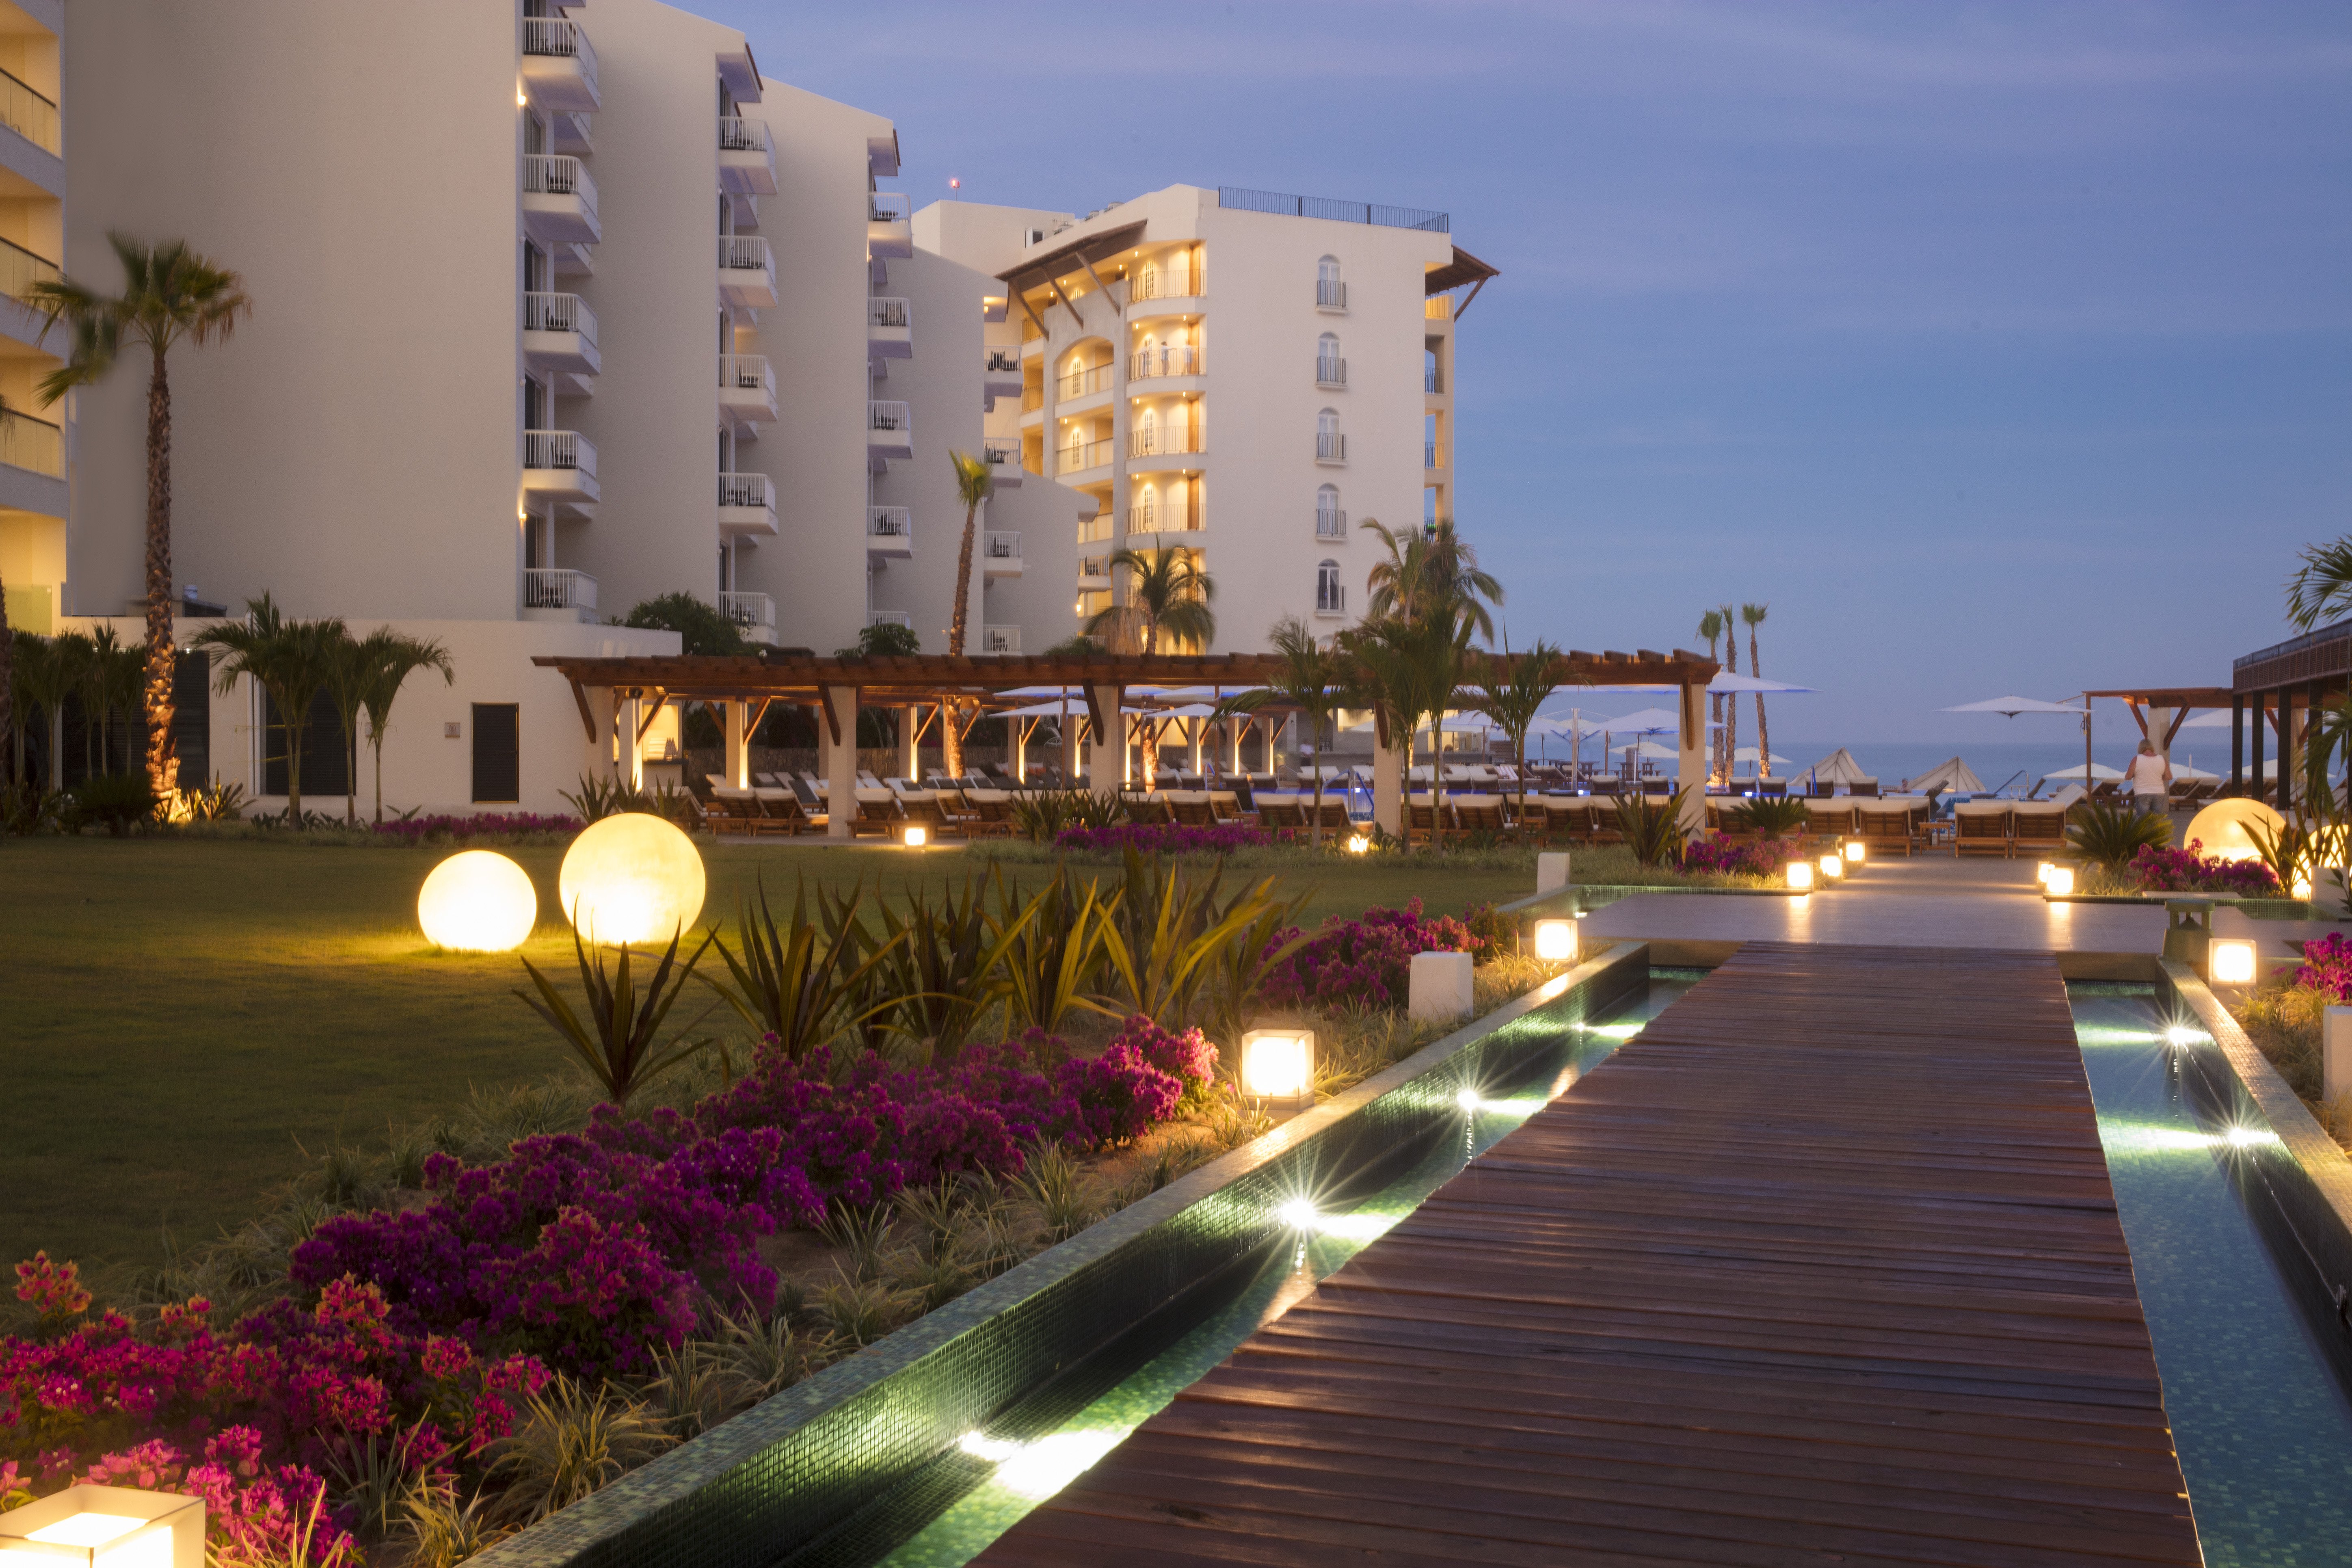 AMResorts and Grupo Hotelero Santa Fe have partnered to open three dual-branded resorts in Punta Cancun Los Cabos and Nuevo 